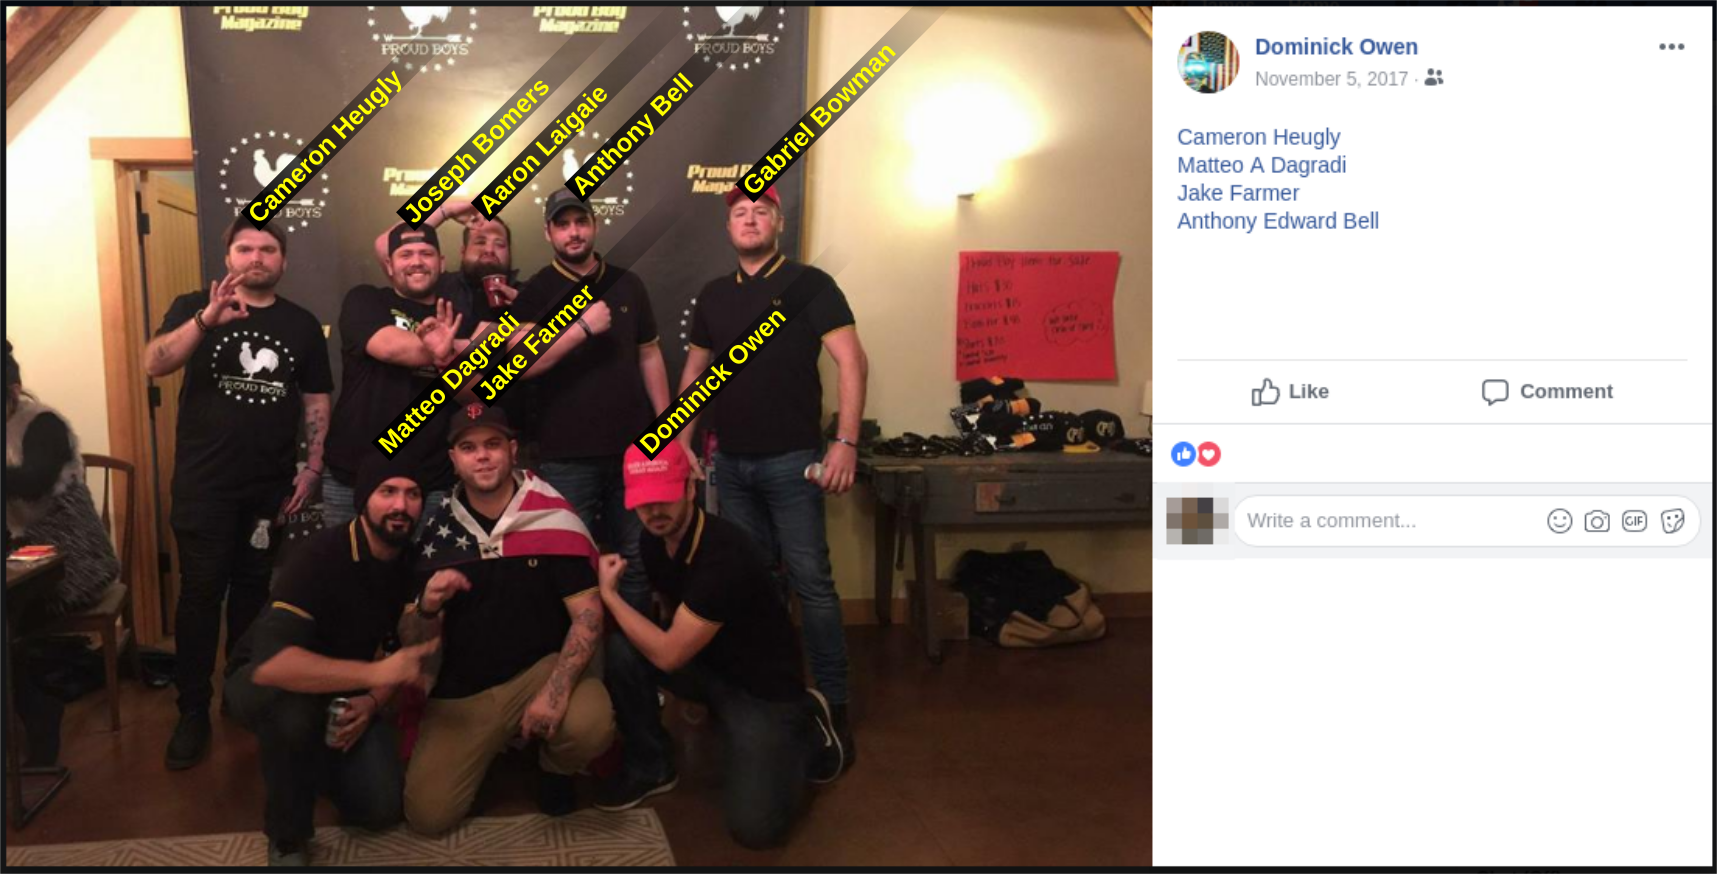 Dominick Owen poses with fellow members of the Proud Boys hate group